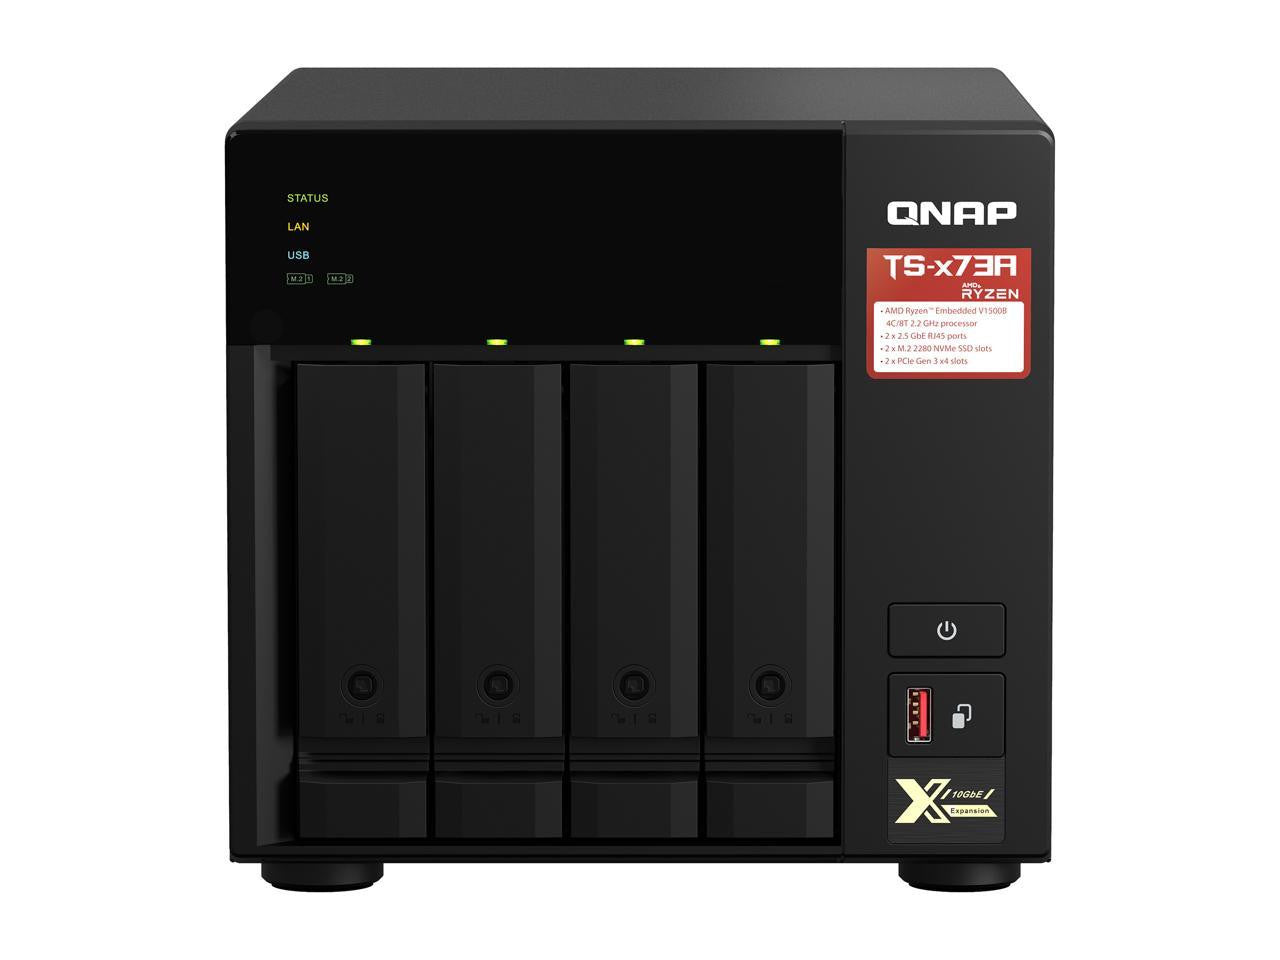 QNAP TS-473A 4-BAY NAS with 8GB DDR4 RAM and 56TB (4x14TB) Western Digital RED PLUS Drives Fully Assembled and Tested